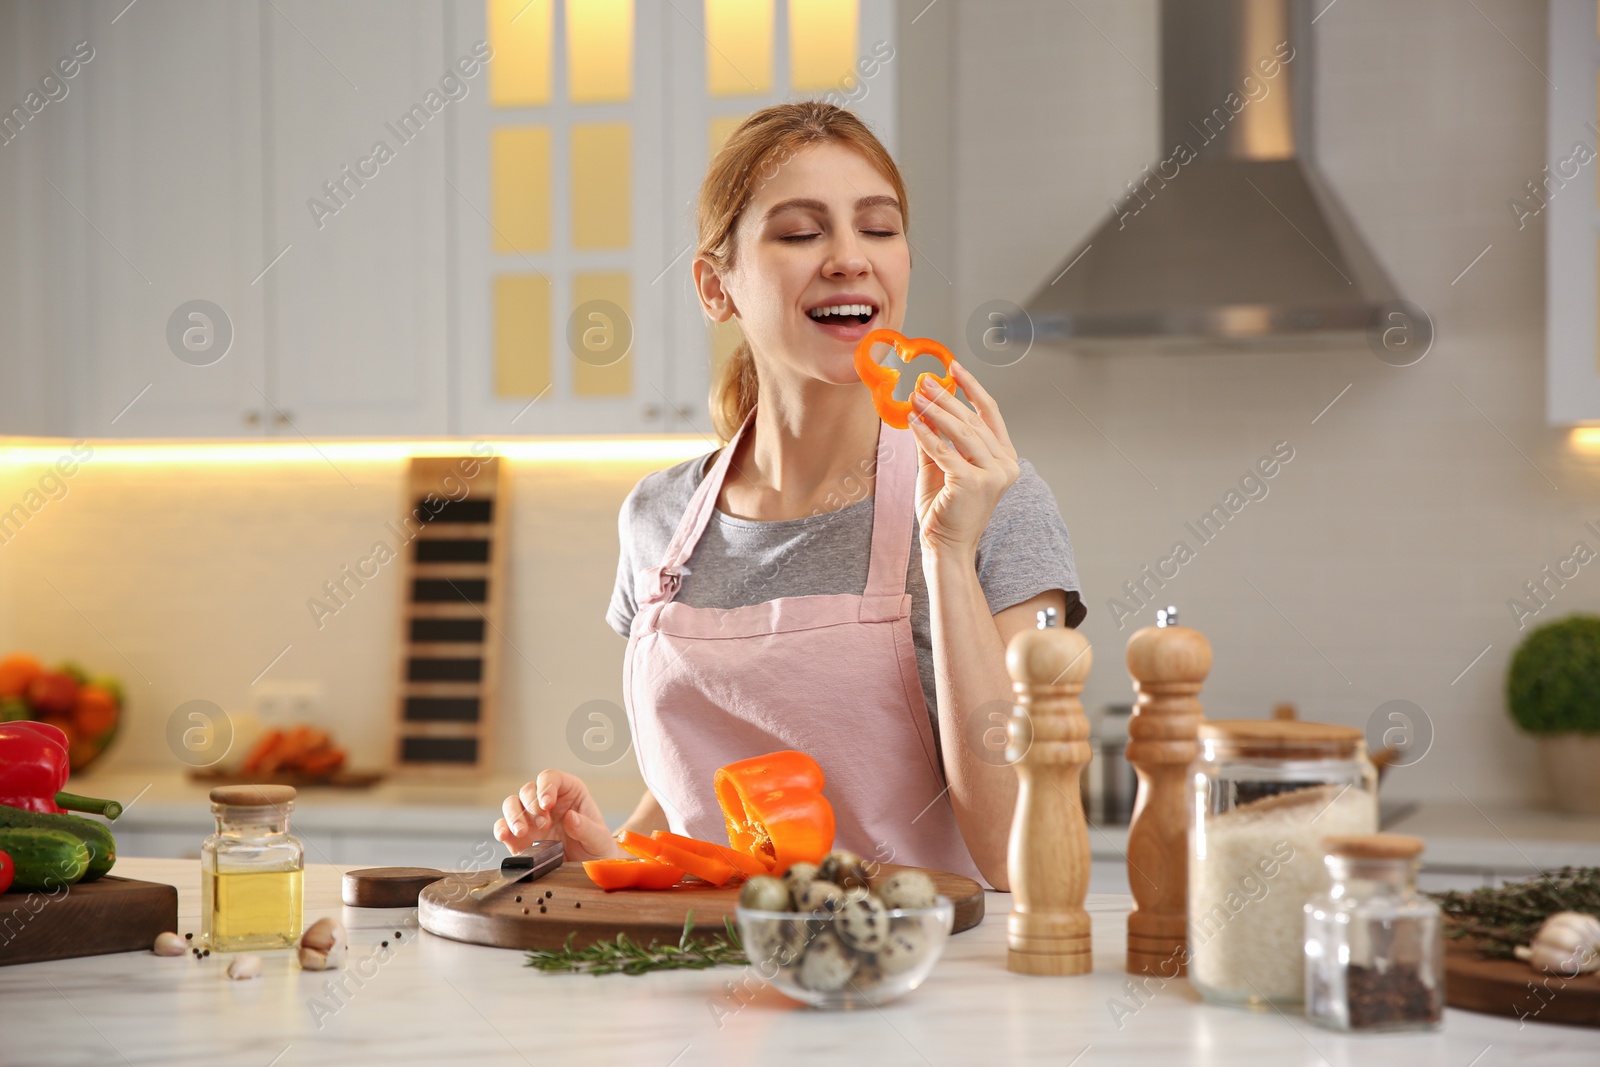 Photo of Young woman cooking at table in kitchen